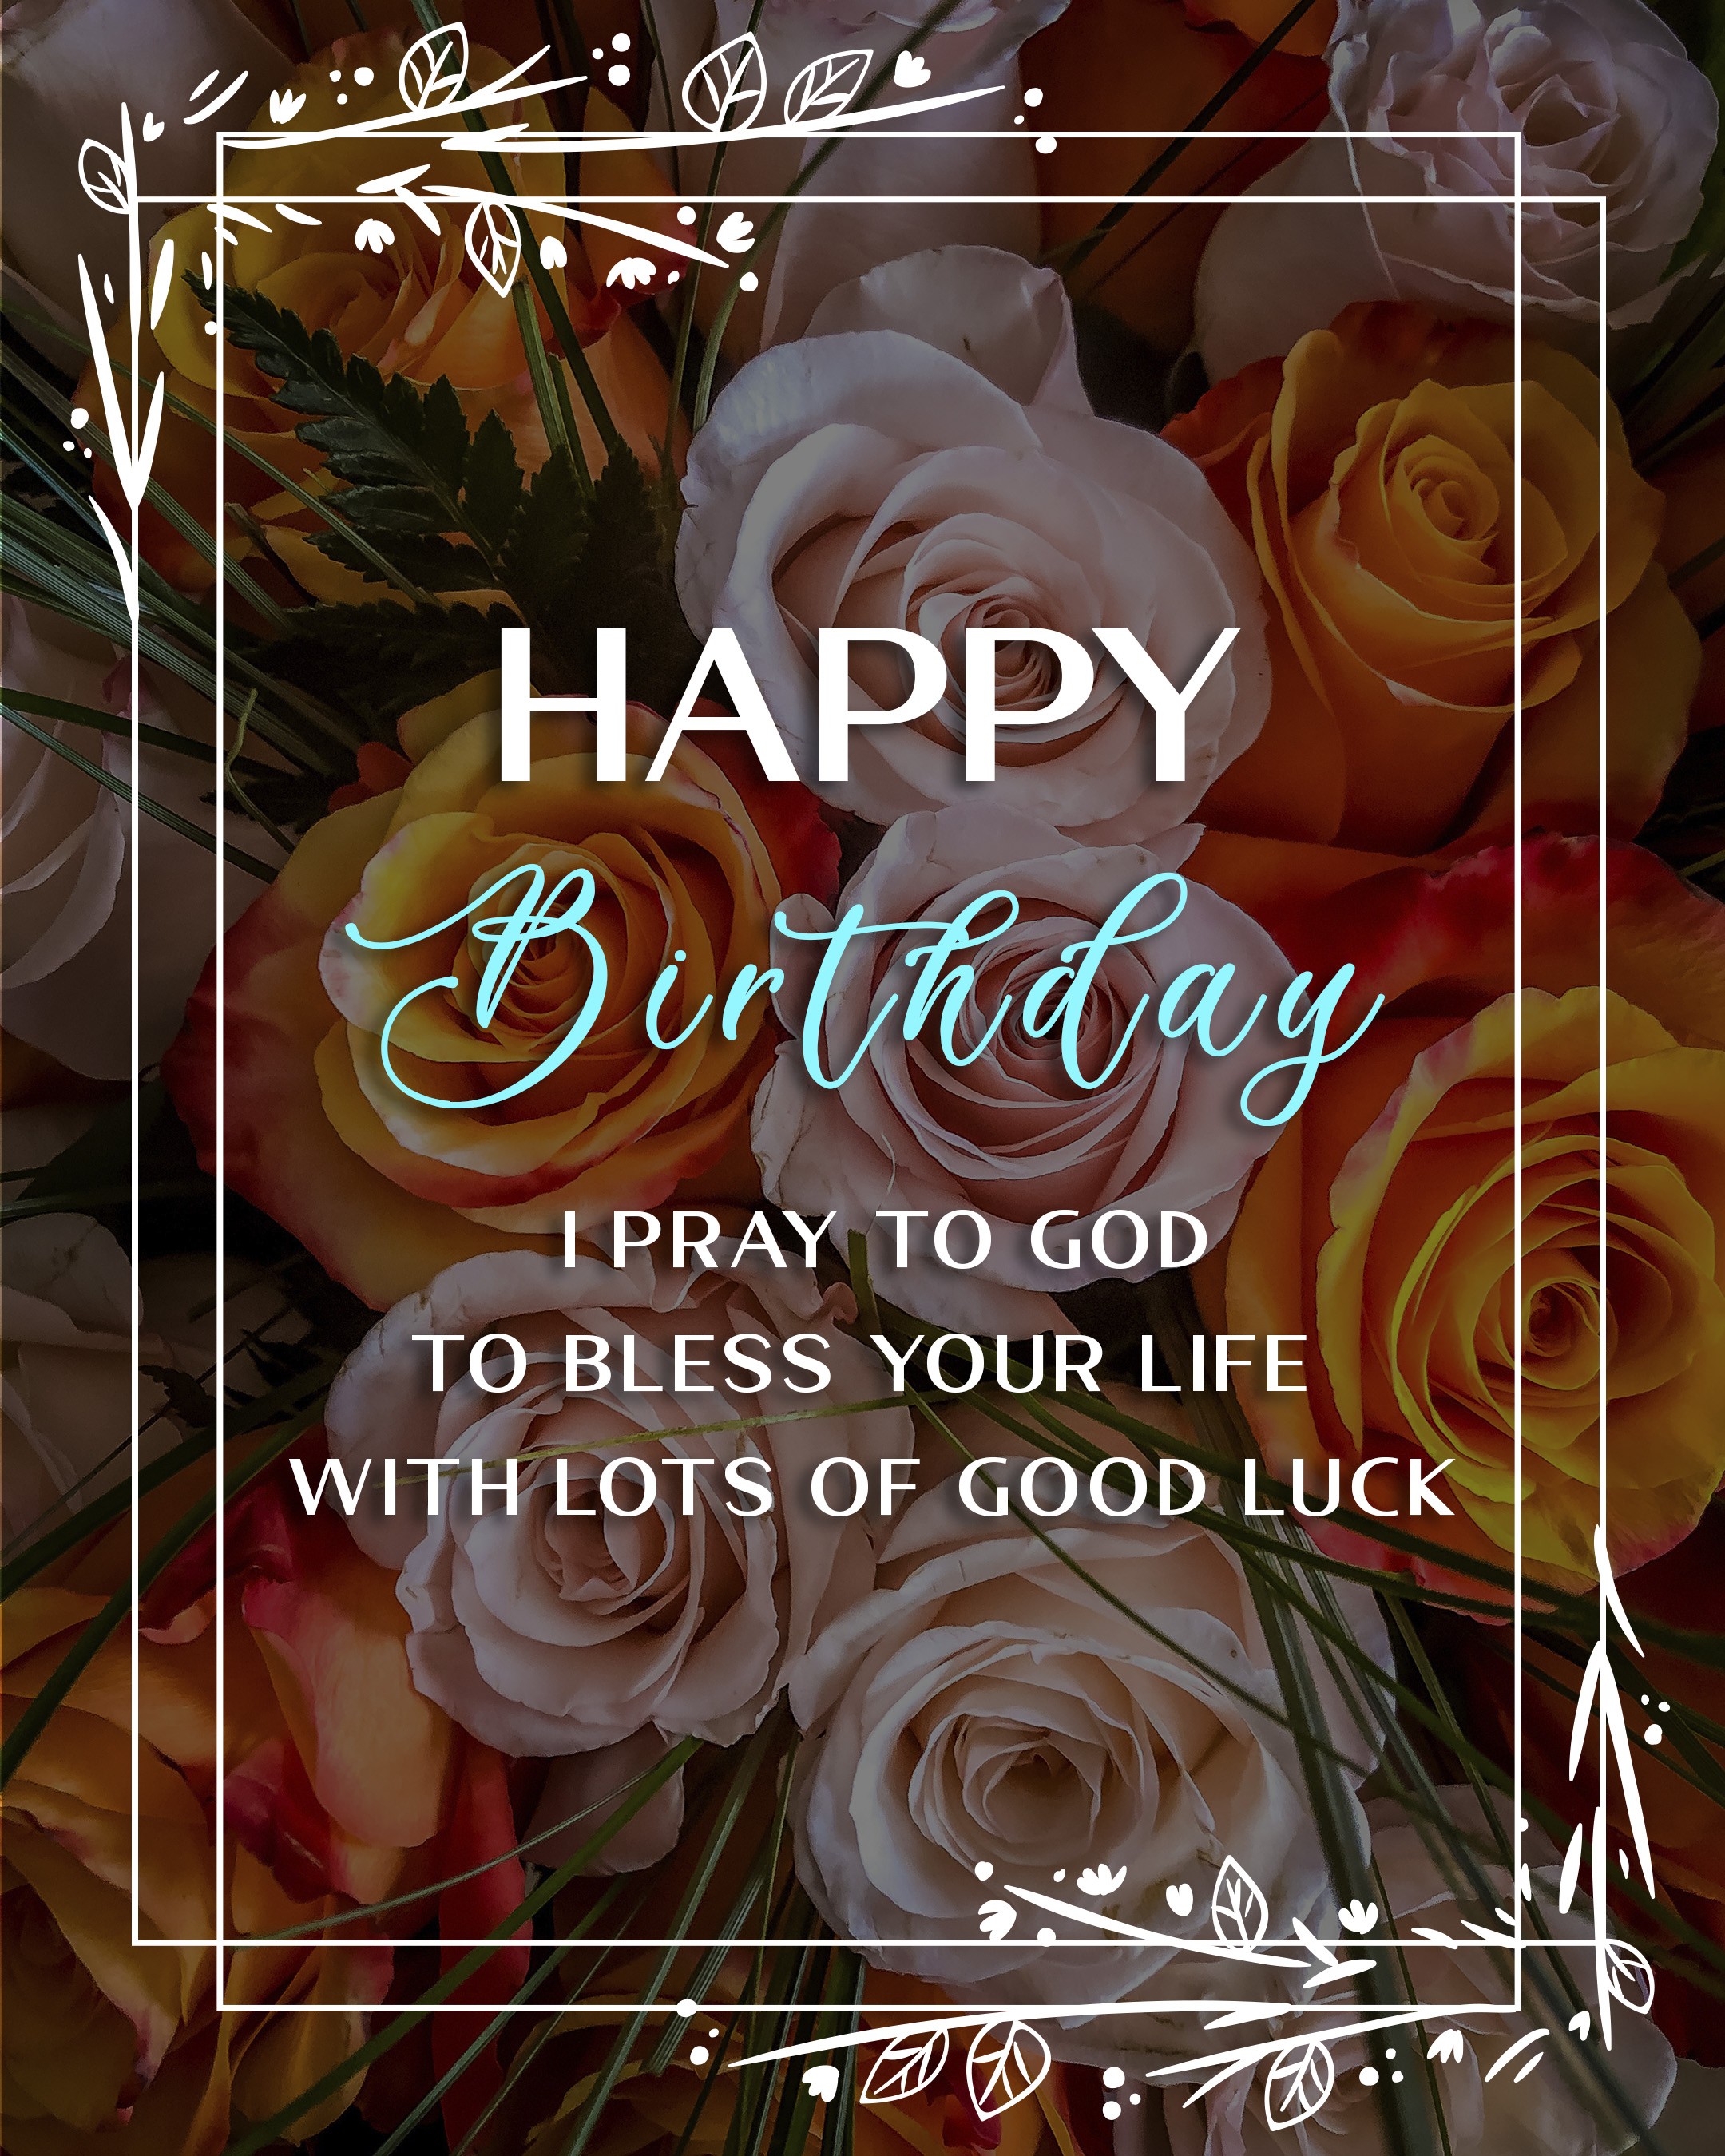 Free Happy Birthday Image With Blessings - birthdayimg.com